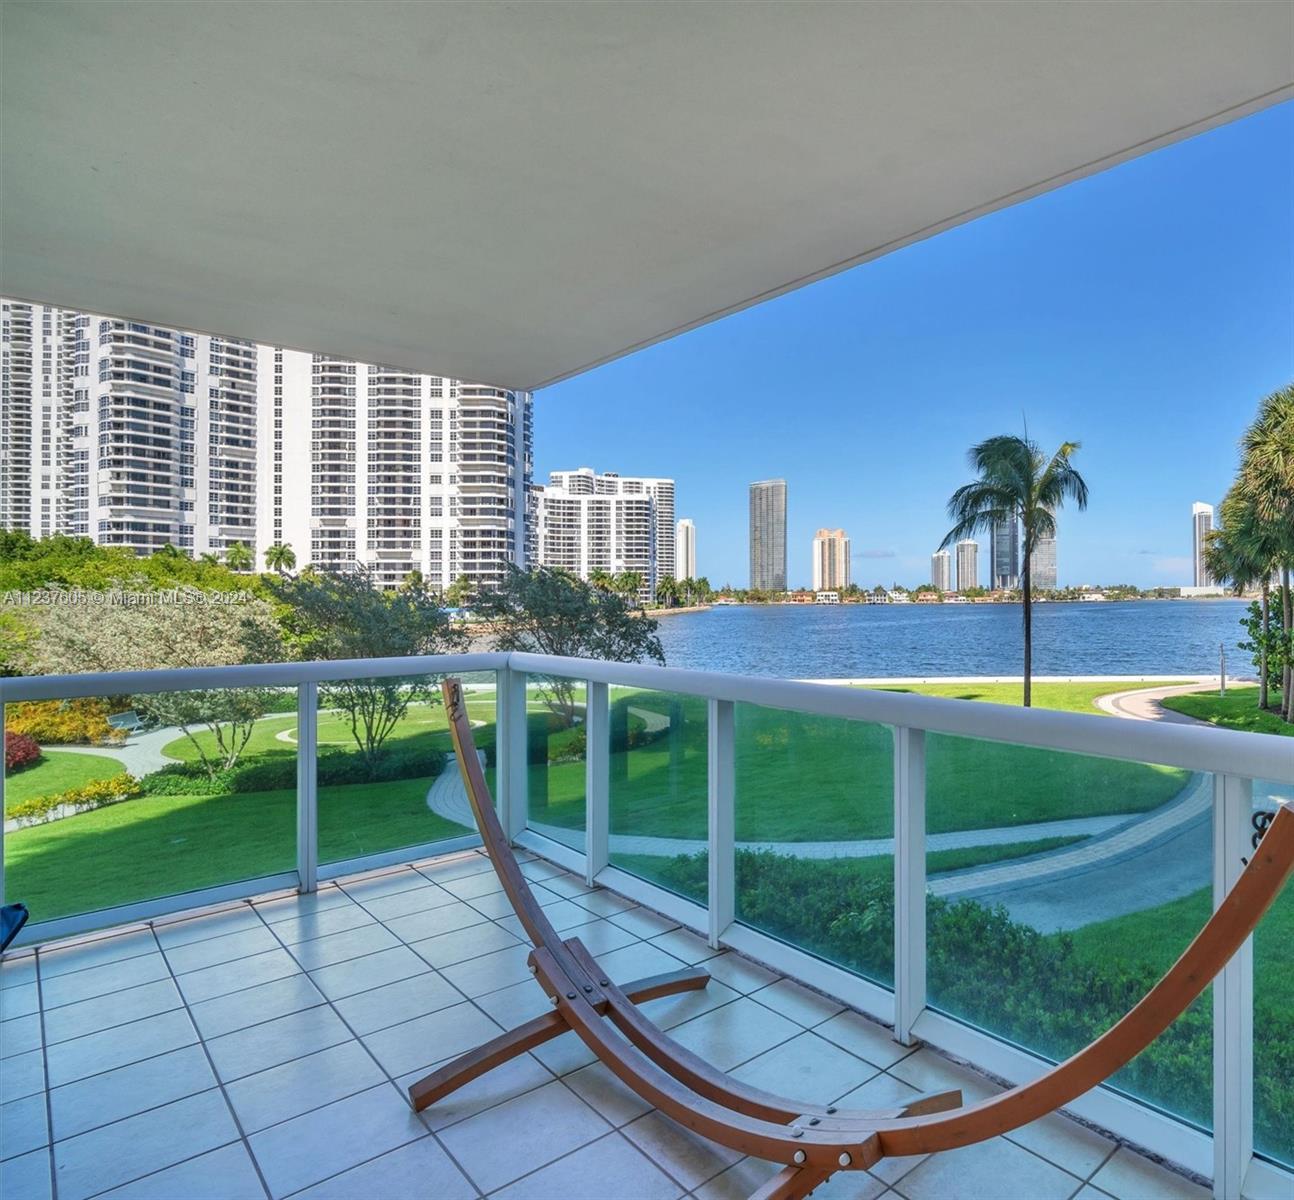 WALK INTO YOUR PALACE!! SPACIOUS 3 BEDS/3.5 BATHS IN AVENTURA. THIS INCREDIBLE CORNER UNIT HAS TO OF